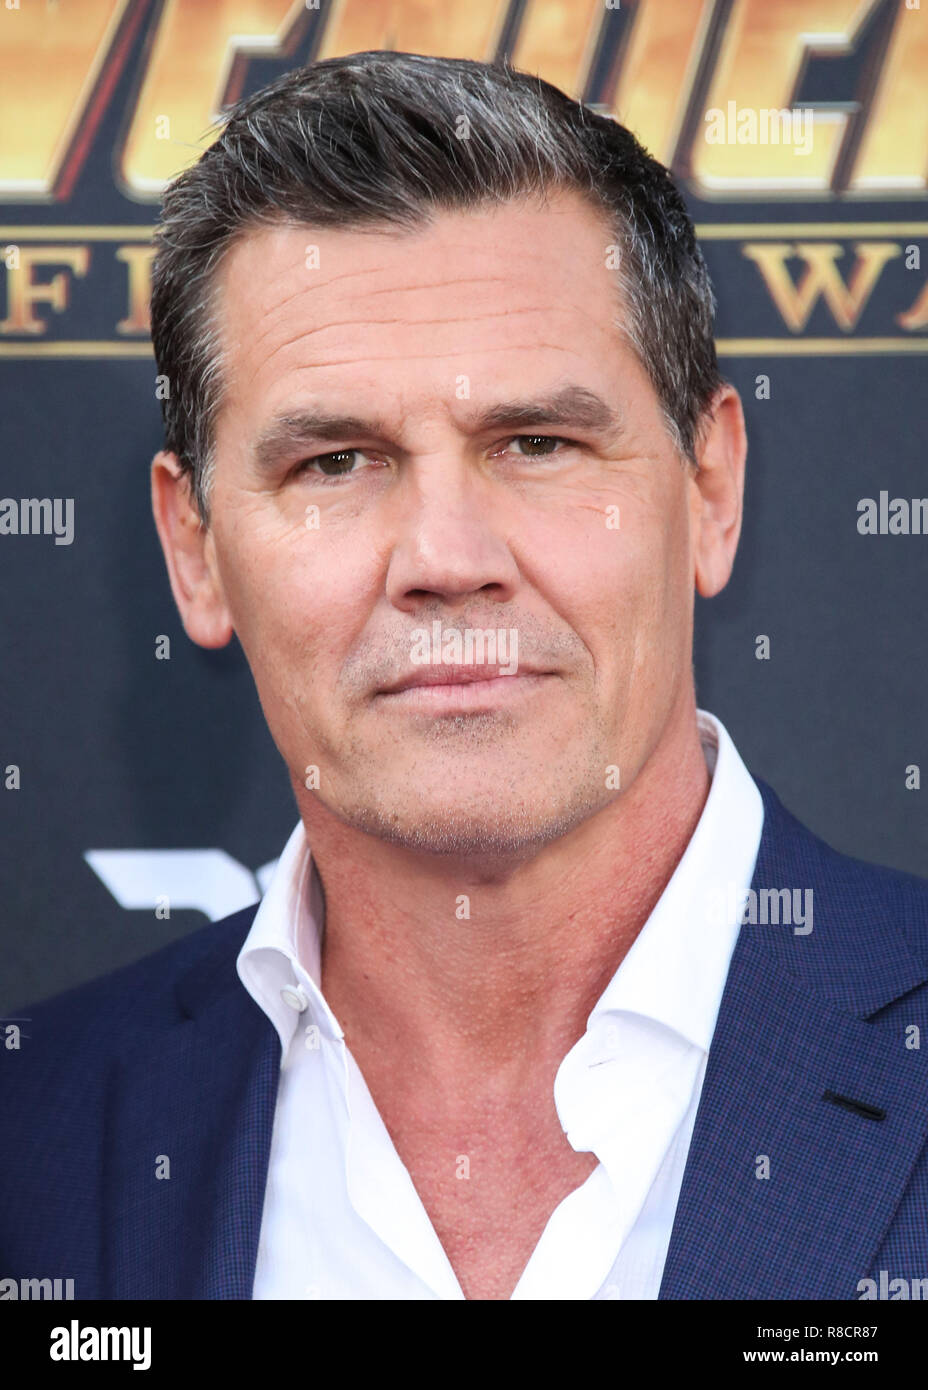 HOLLYWOOD, LOS ANGELES, CA, USA - APRIL 23: Josh Brolin at the World Premiere Of Disney And Marvel's 'Avengers: Infinity War' held at the El Capitan Theatre, Dolby Theatre and TCL Chinese Theatre IMAX on April 23, 2018 in Hollywood, Los Angeles, California, United States. (Photo by Xavier Collin/Image Press Agency) Stock Photo